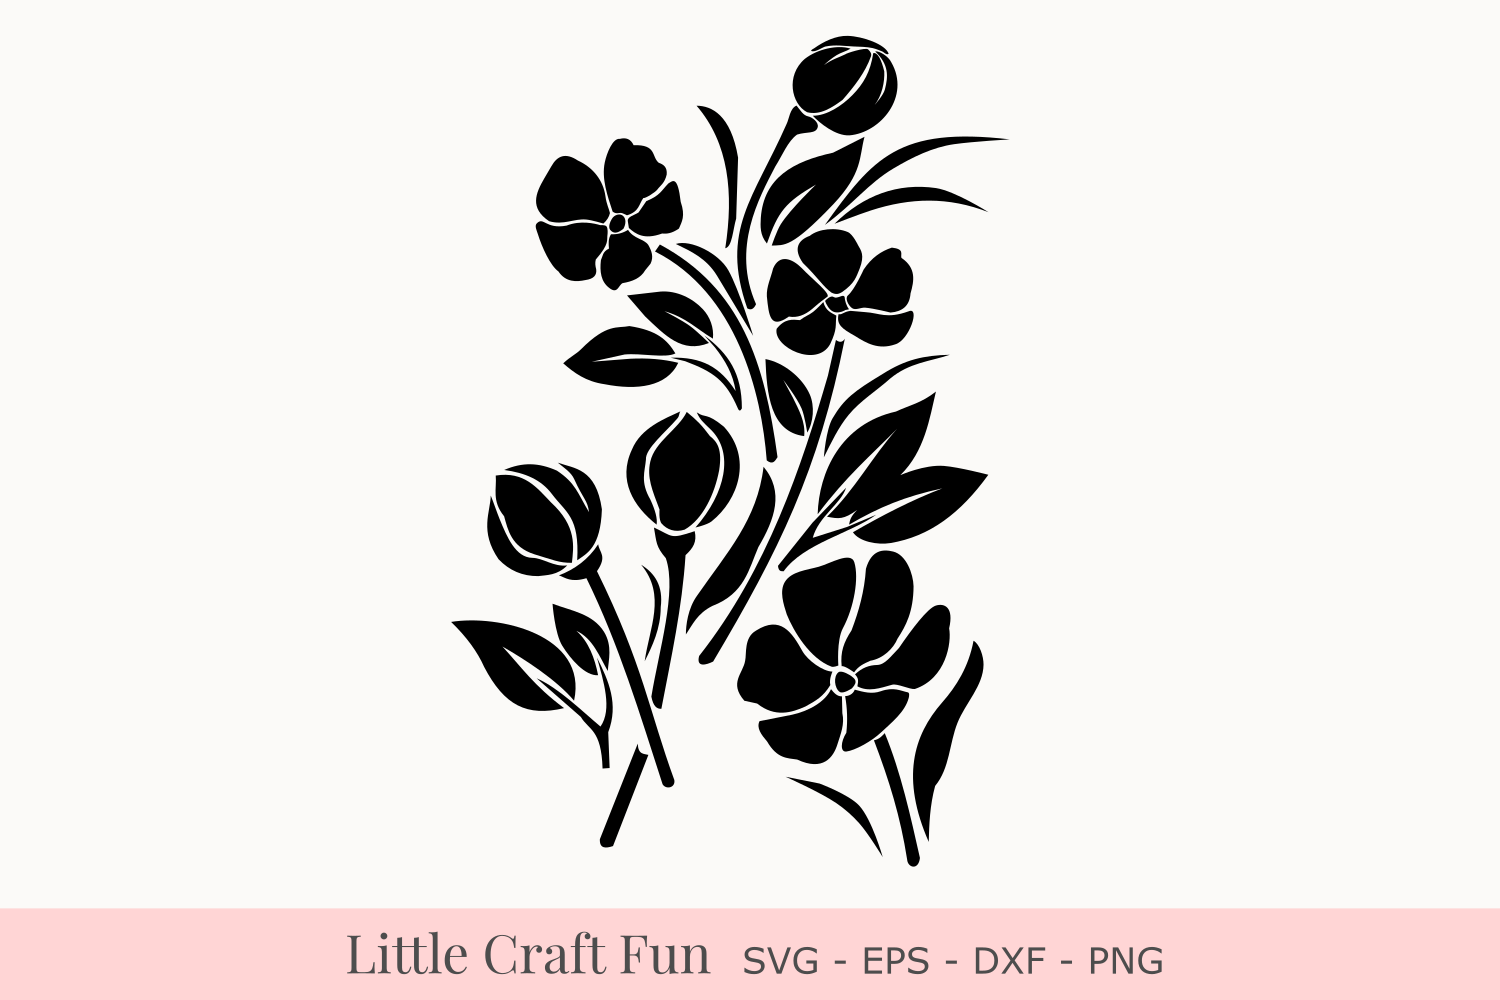 Download Flowers Silhouette Svg, Florals Silhouette Svg, Silhouette